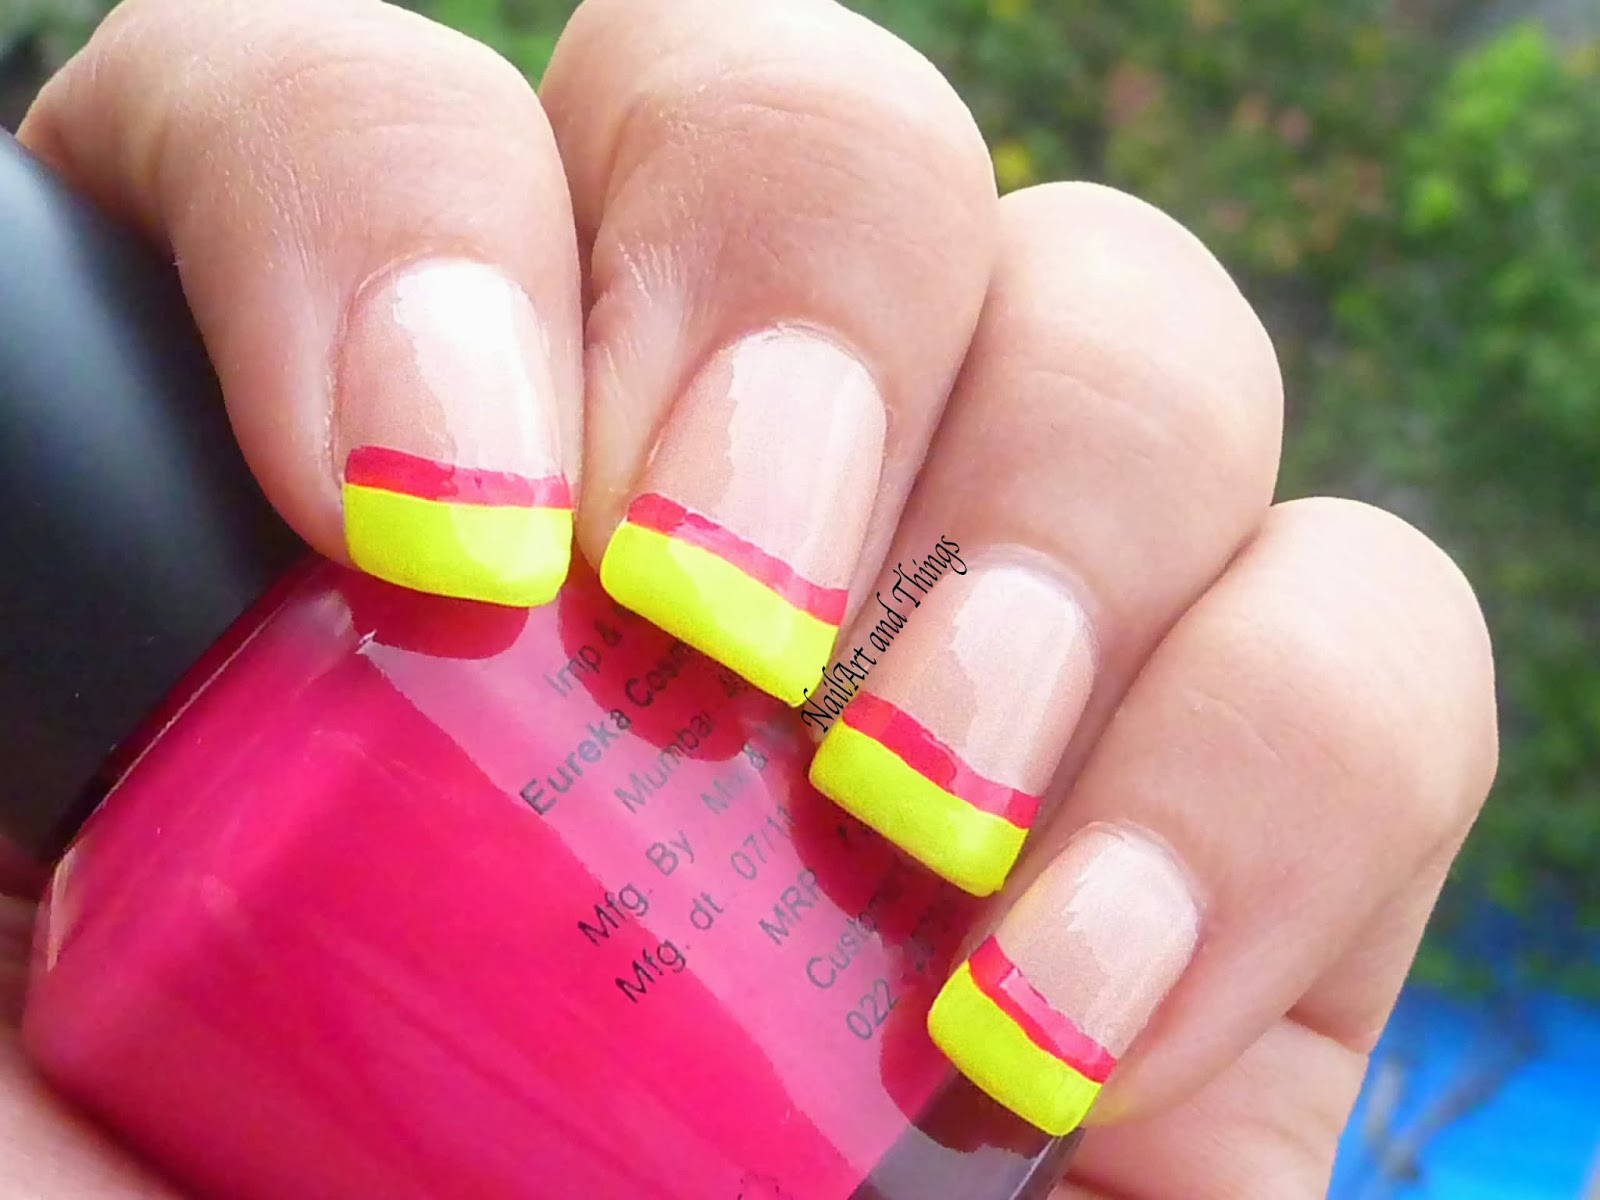 1. Neon Nail Art Designs for Summer - wide 10